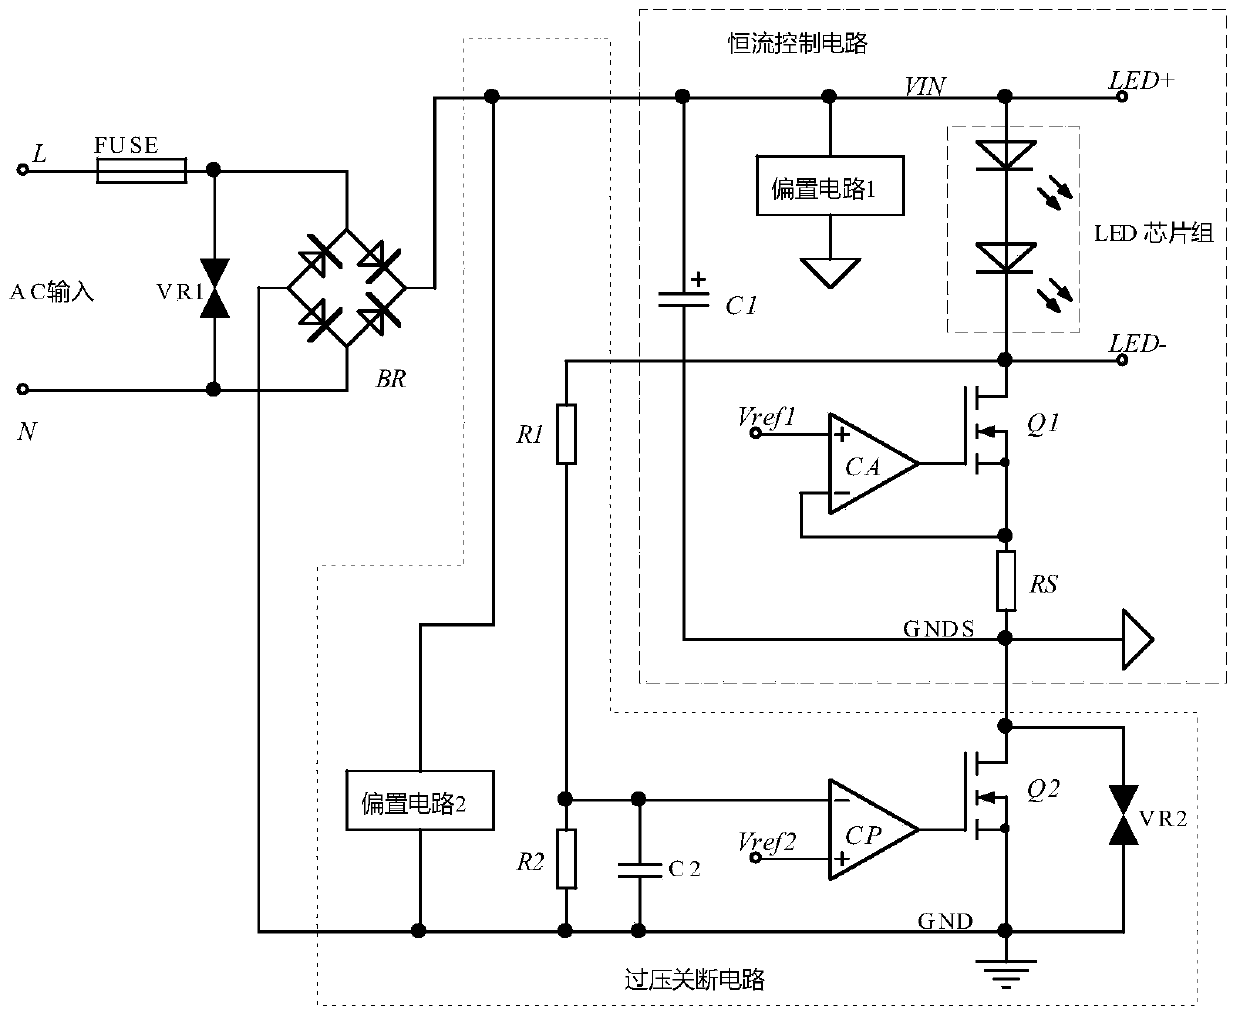 A linear drive circuit for led lighting fixtures